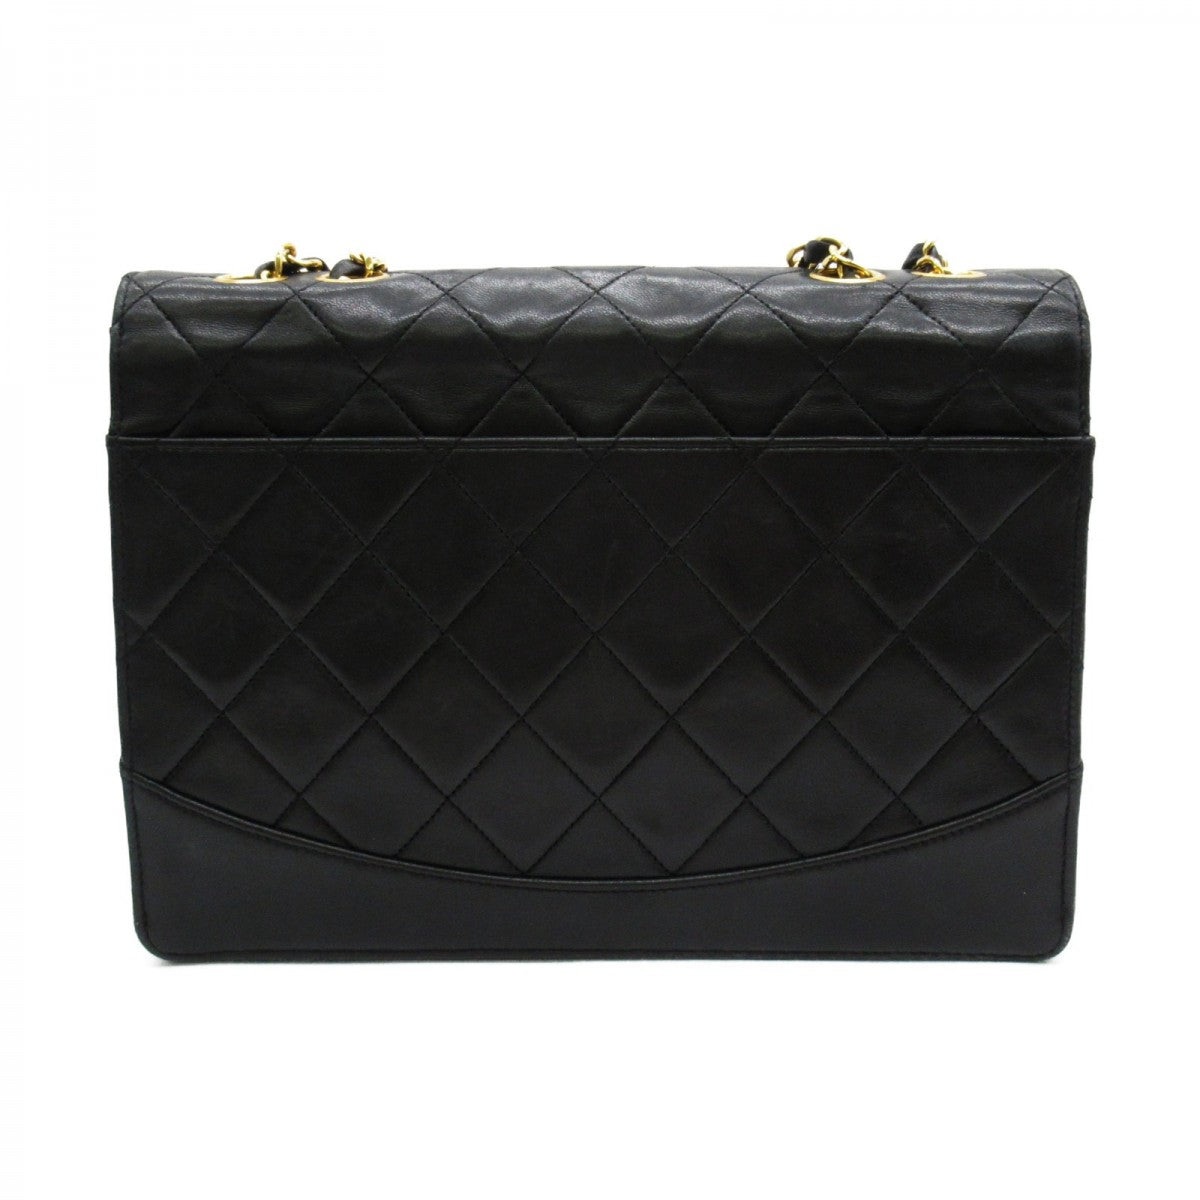 Reissue Quilted Leather Flap Bag